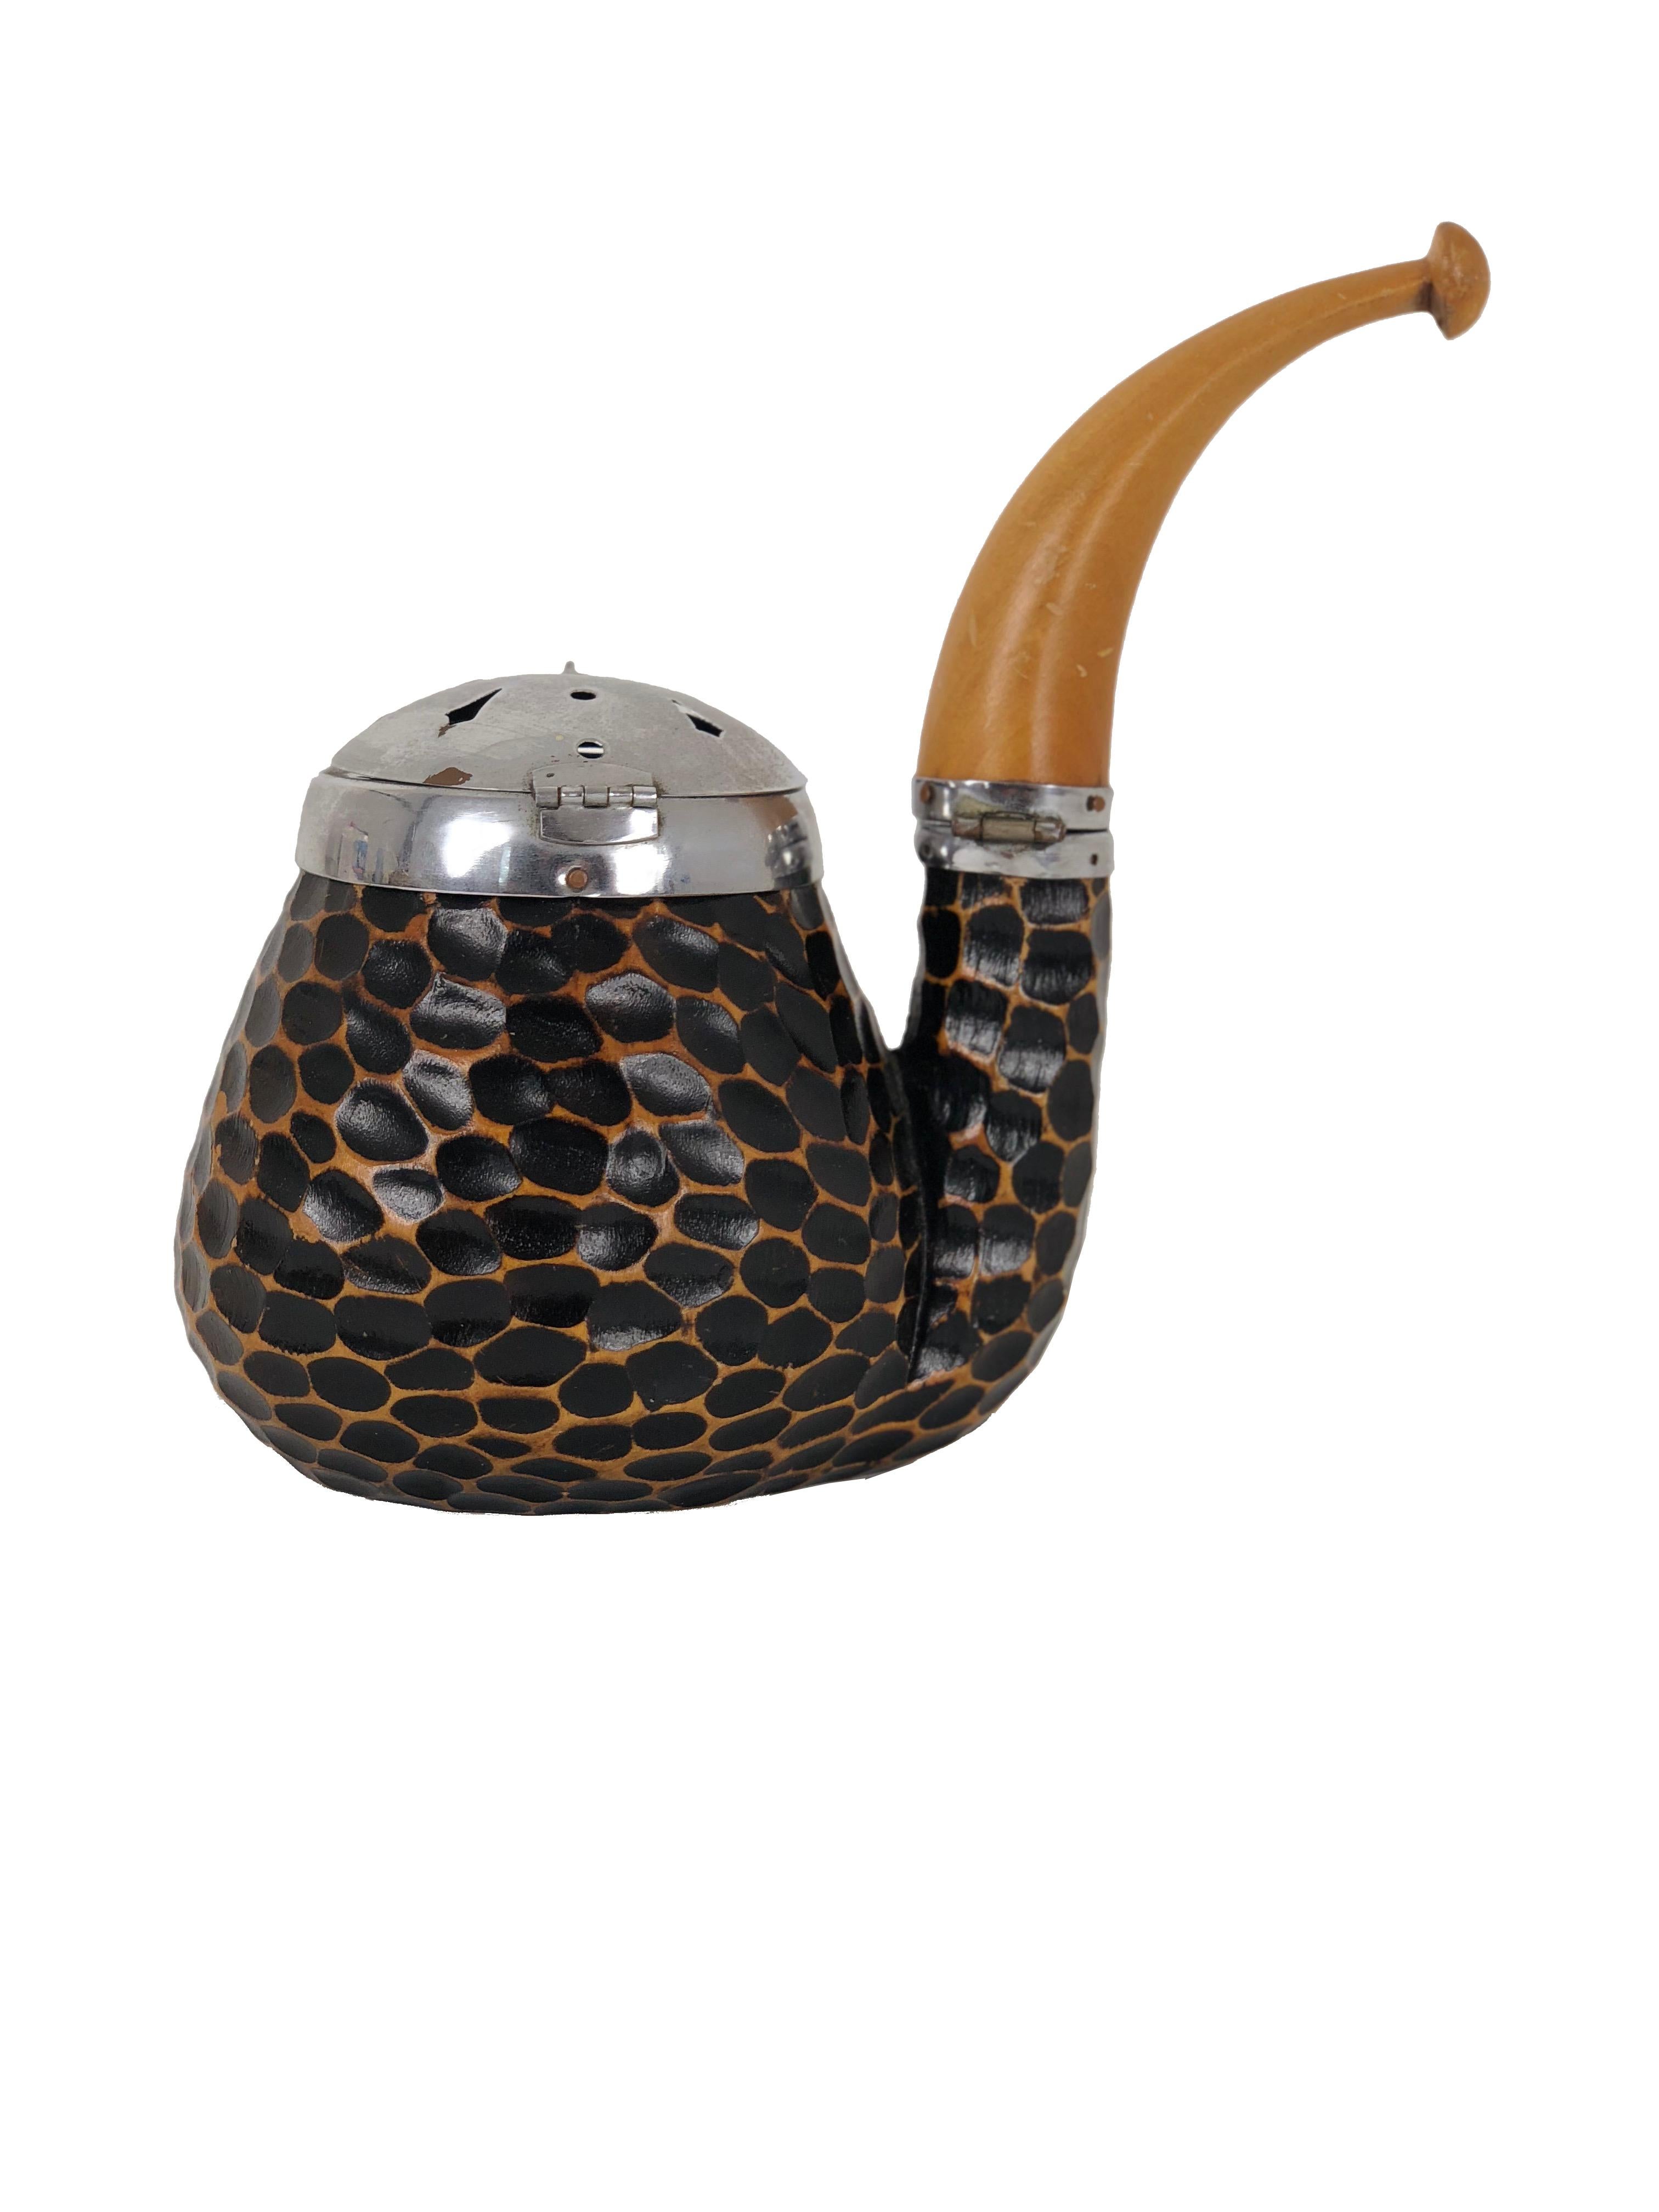 Mid-Century Modern Vintage Black Aldo Tura Tobacco Wood and Brass Pipe, 1940s, Italy